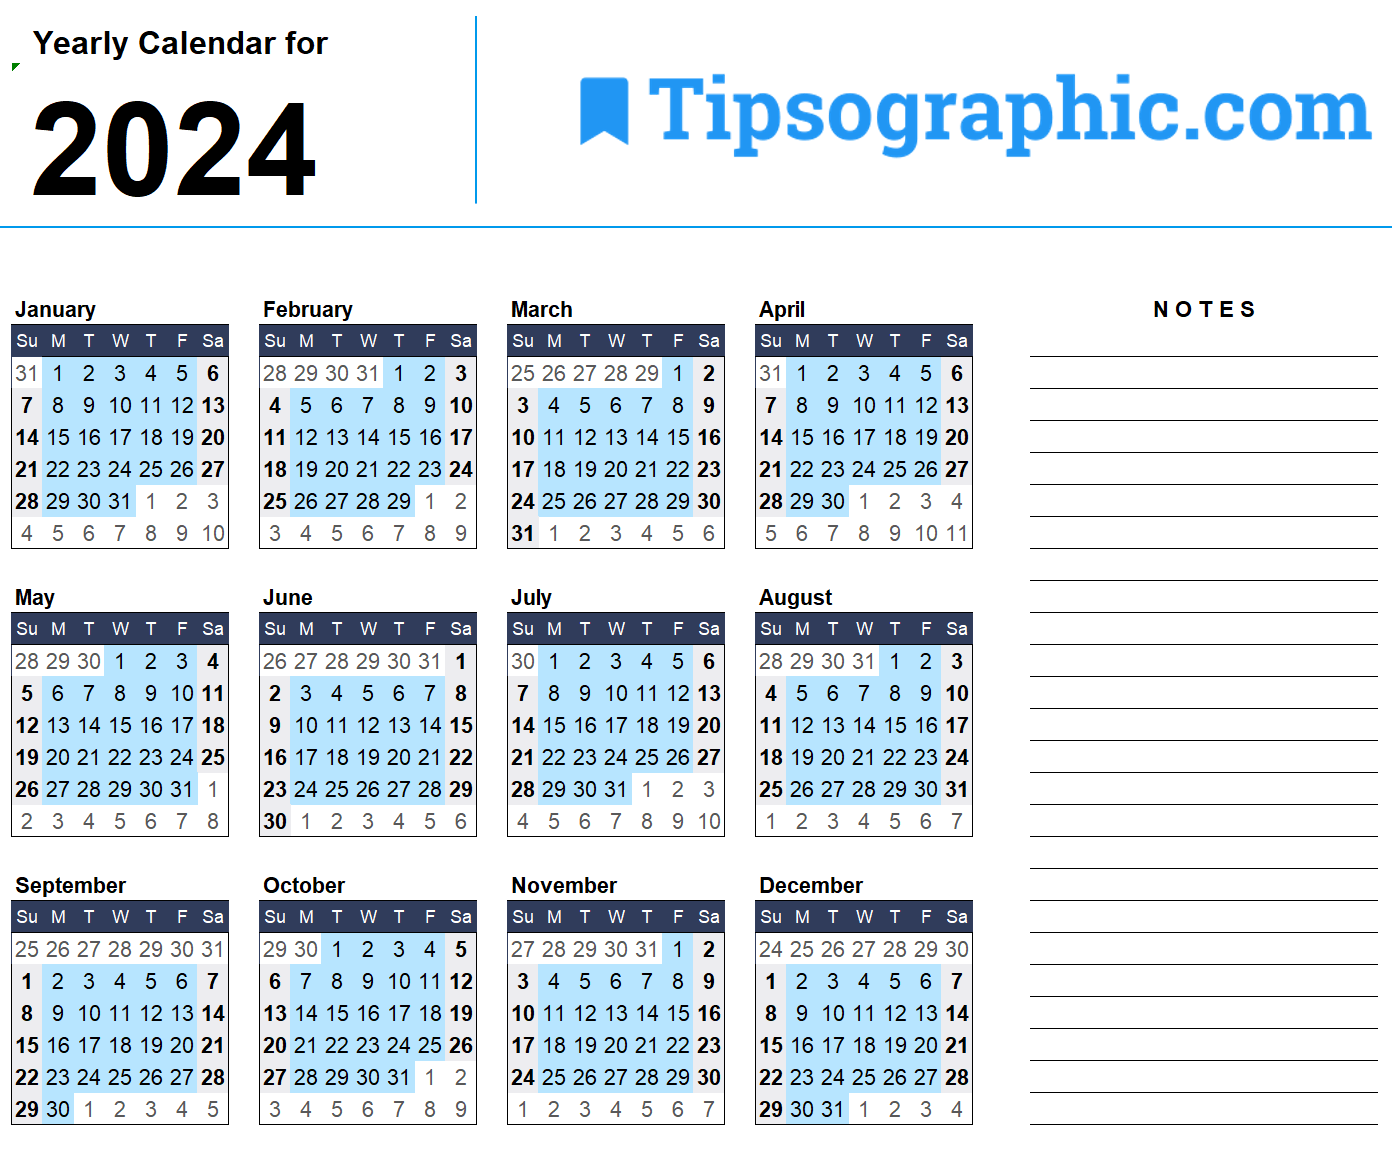 2024 Yearly Calendar Excel Tipsographic 1 